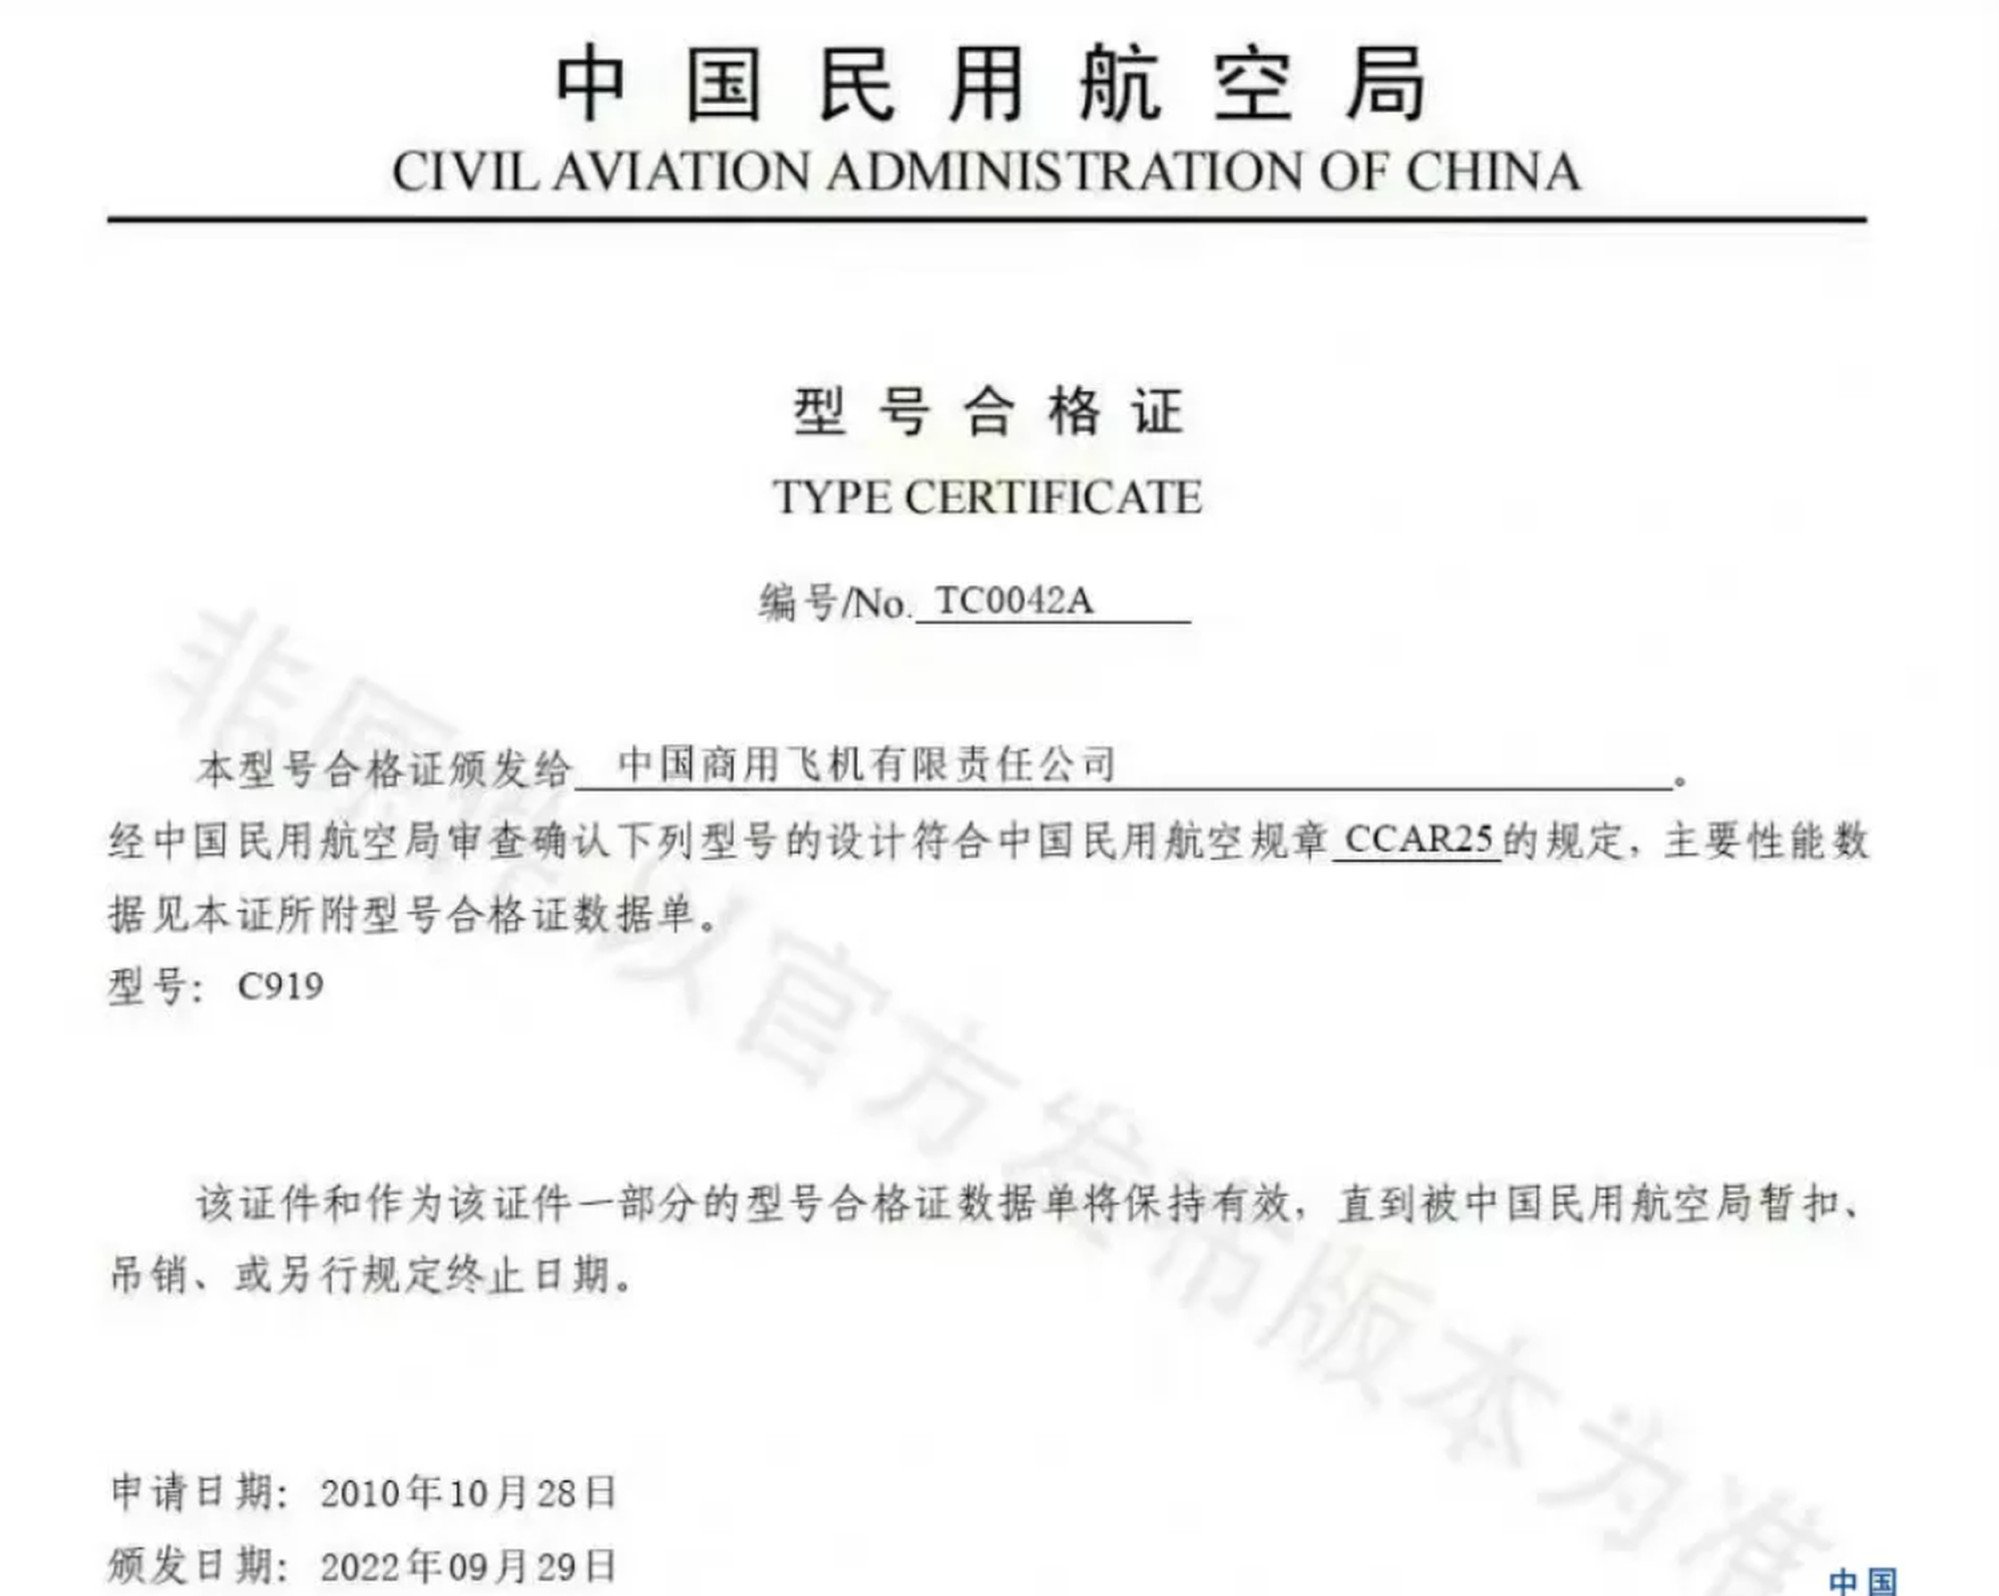 The type certificate seemingly issued by the Civil Aviation Administration of China (CAAC) to the state-owned Commercial Aircraft Corporation of China (Comac) for the C919 dated September 29, 2022. Photo: Weibo